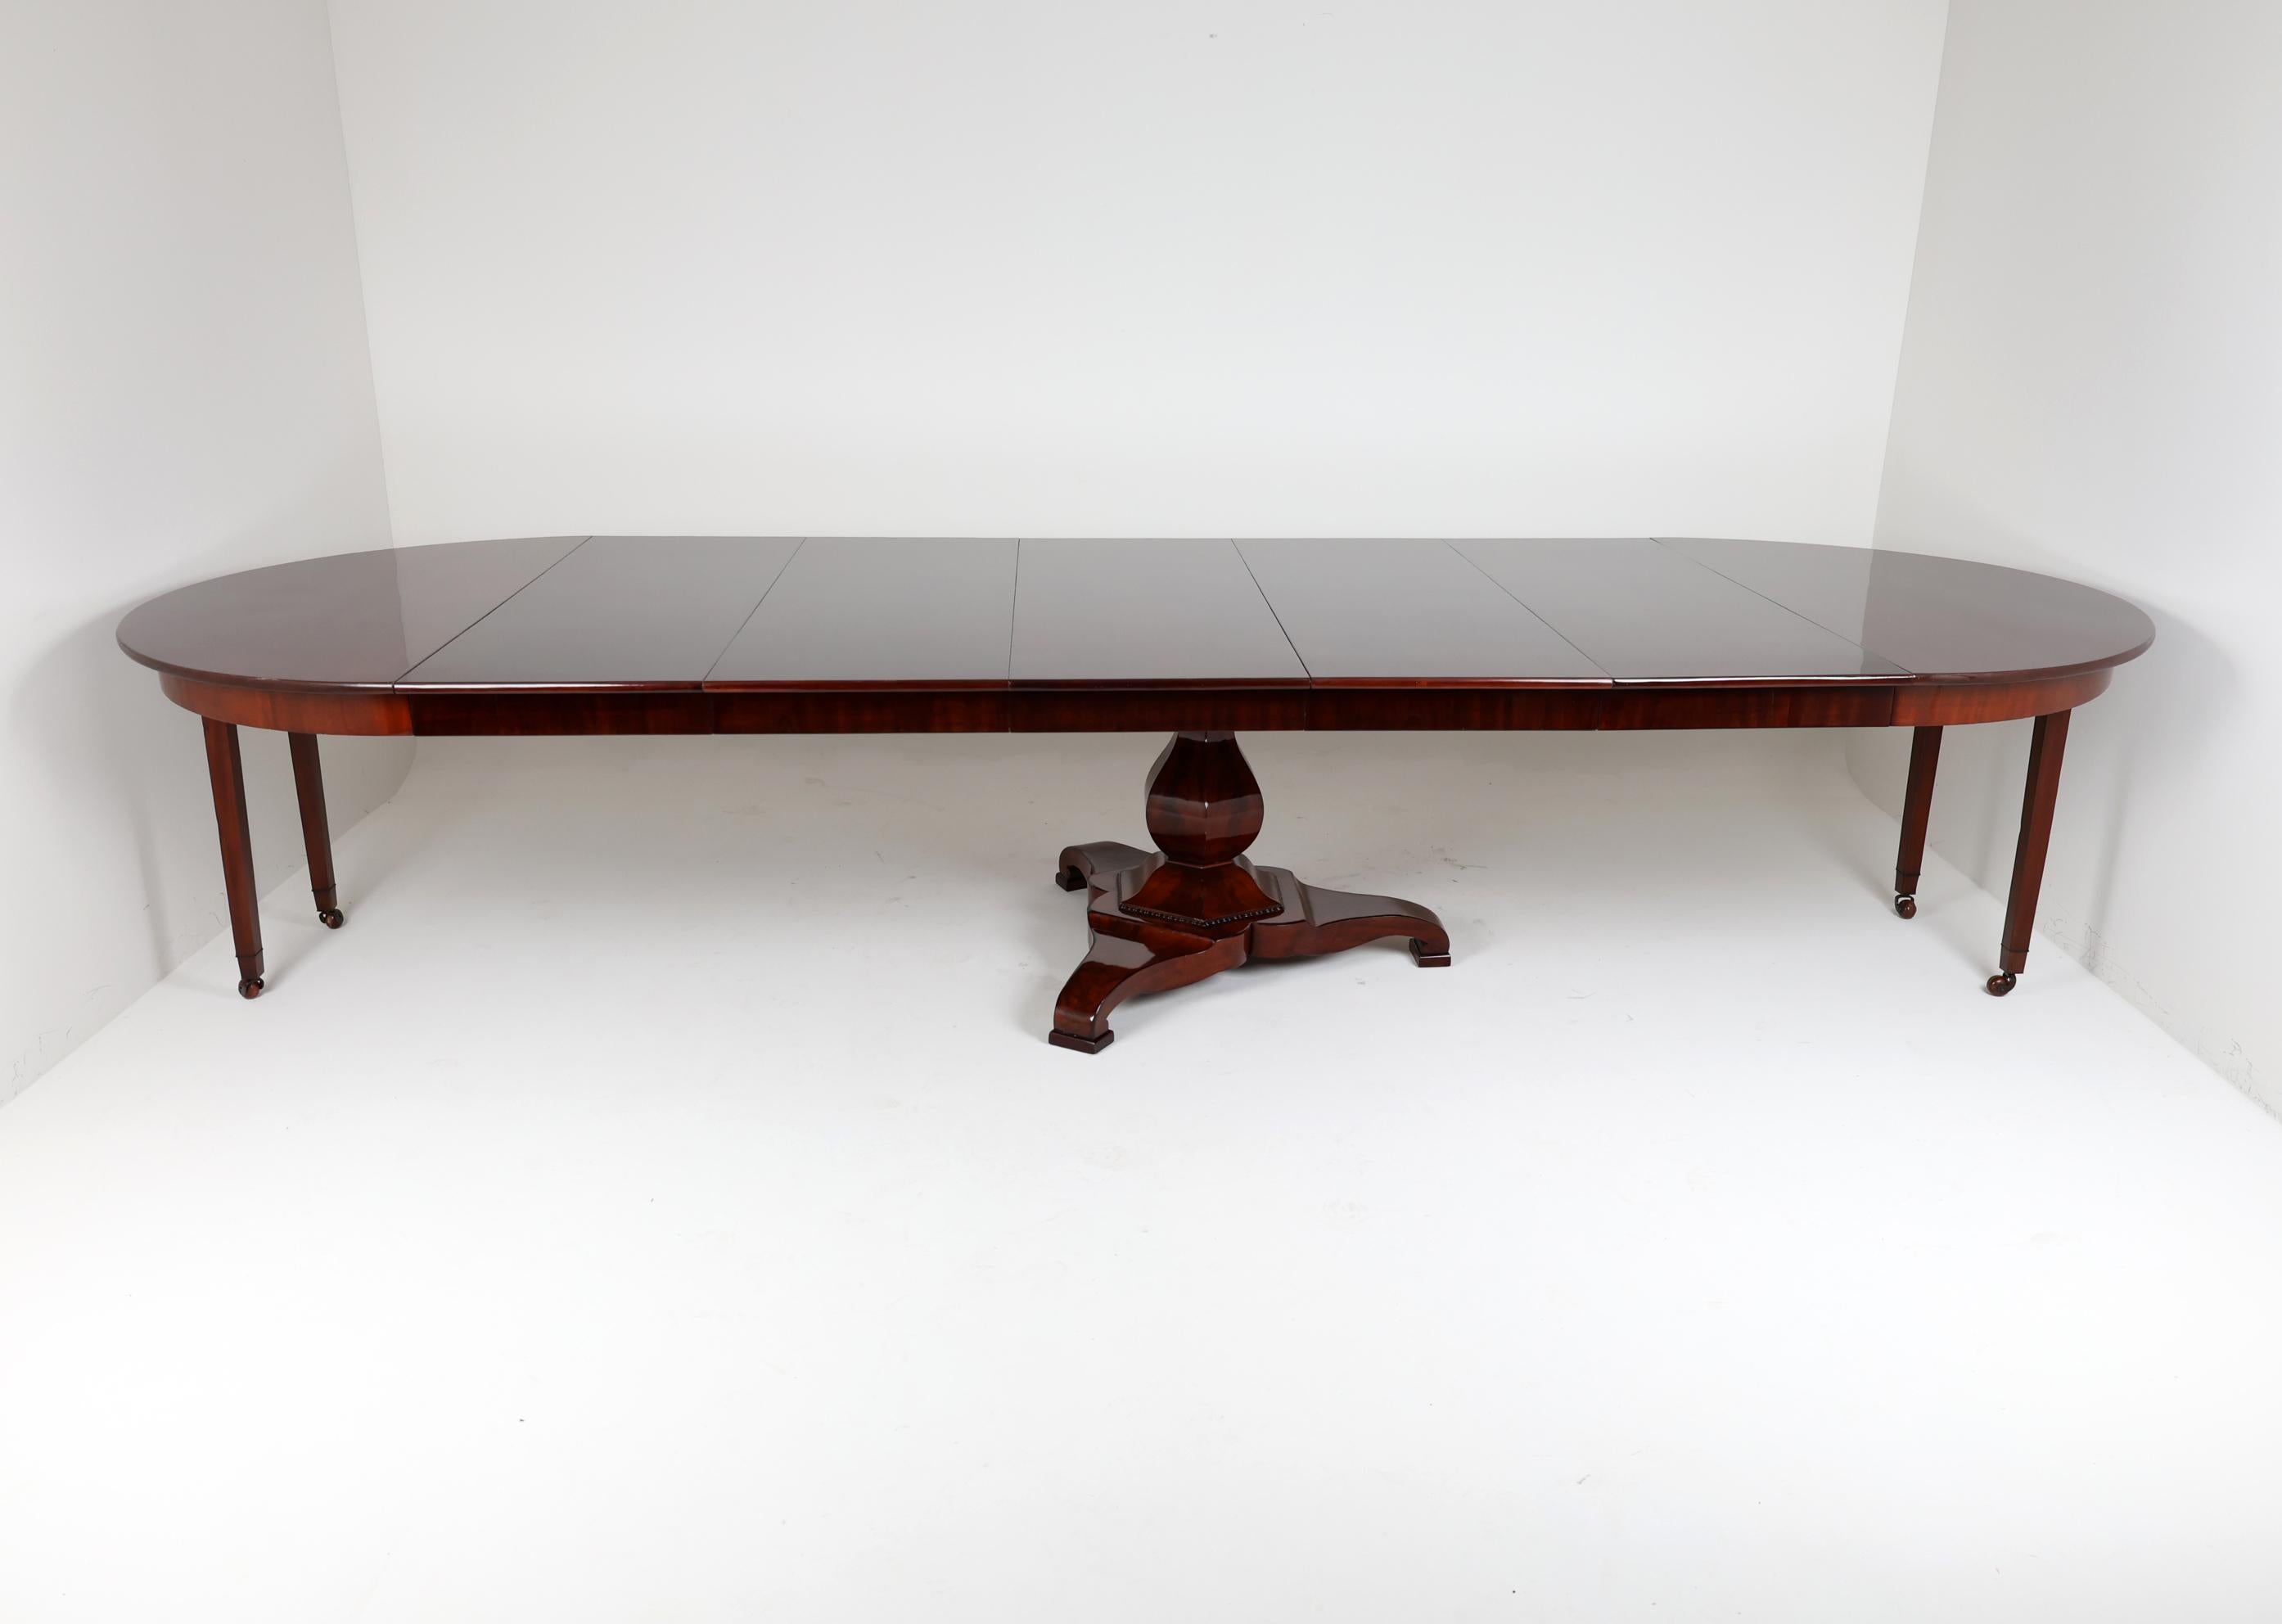 19th Century Mahogany Dining Room Table, 177 inches Long For Sale 3